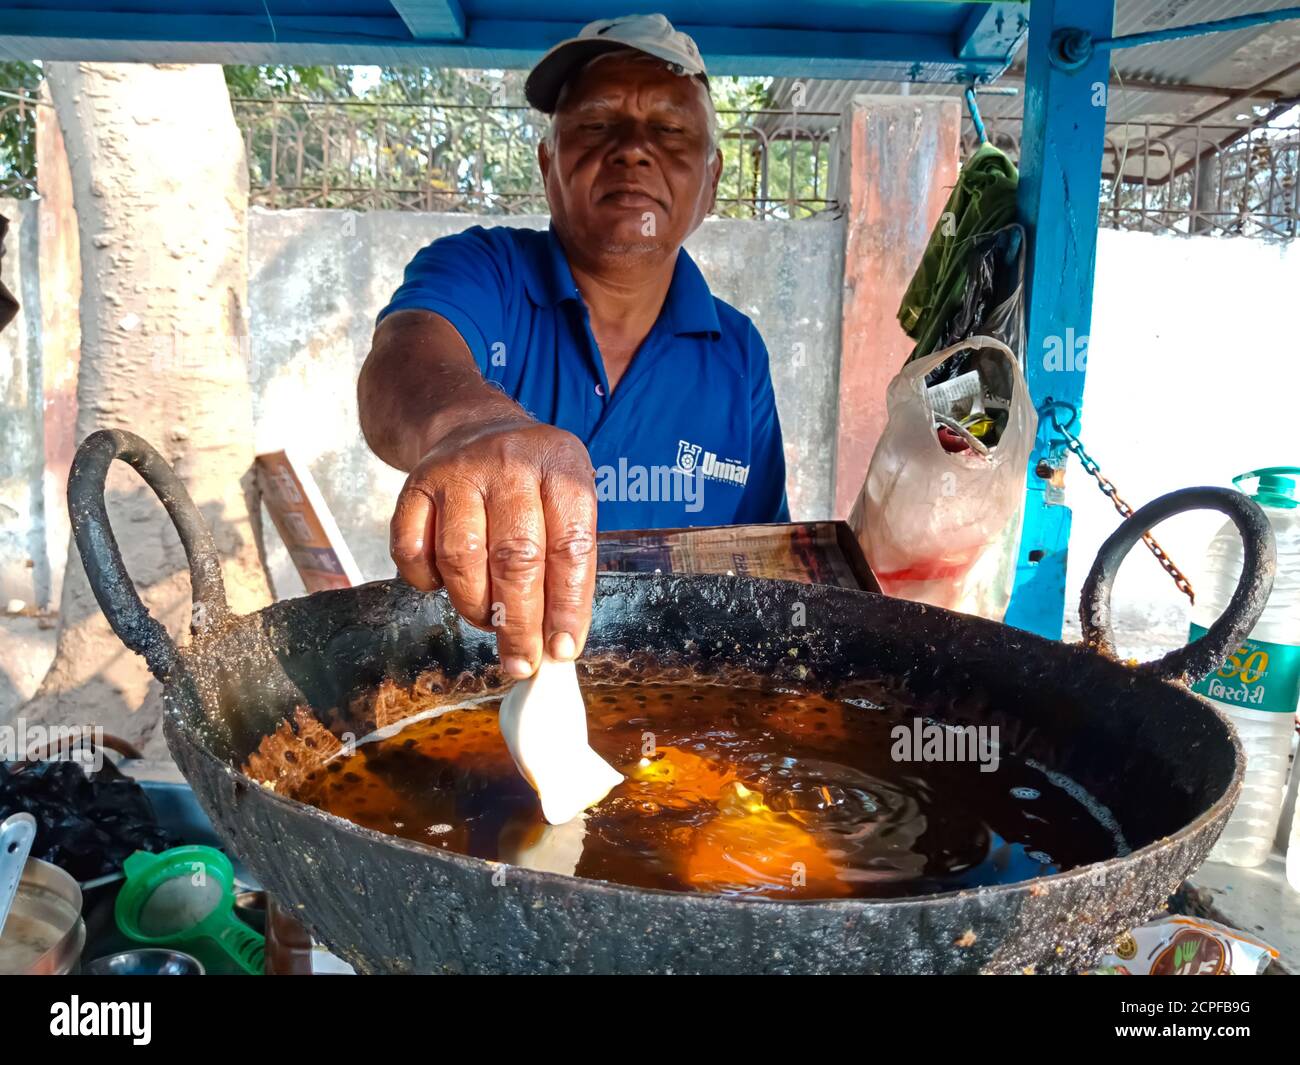 DISTRICT KATNI, INDIA - JANUARY 18, 2020: An indian old man frying samosa in the oil pan at street food corner. Stock Photo